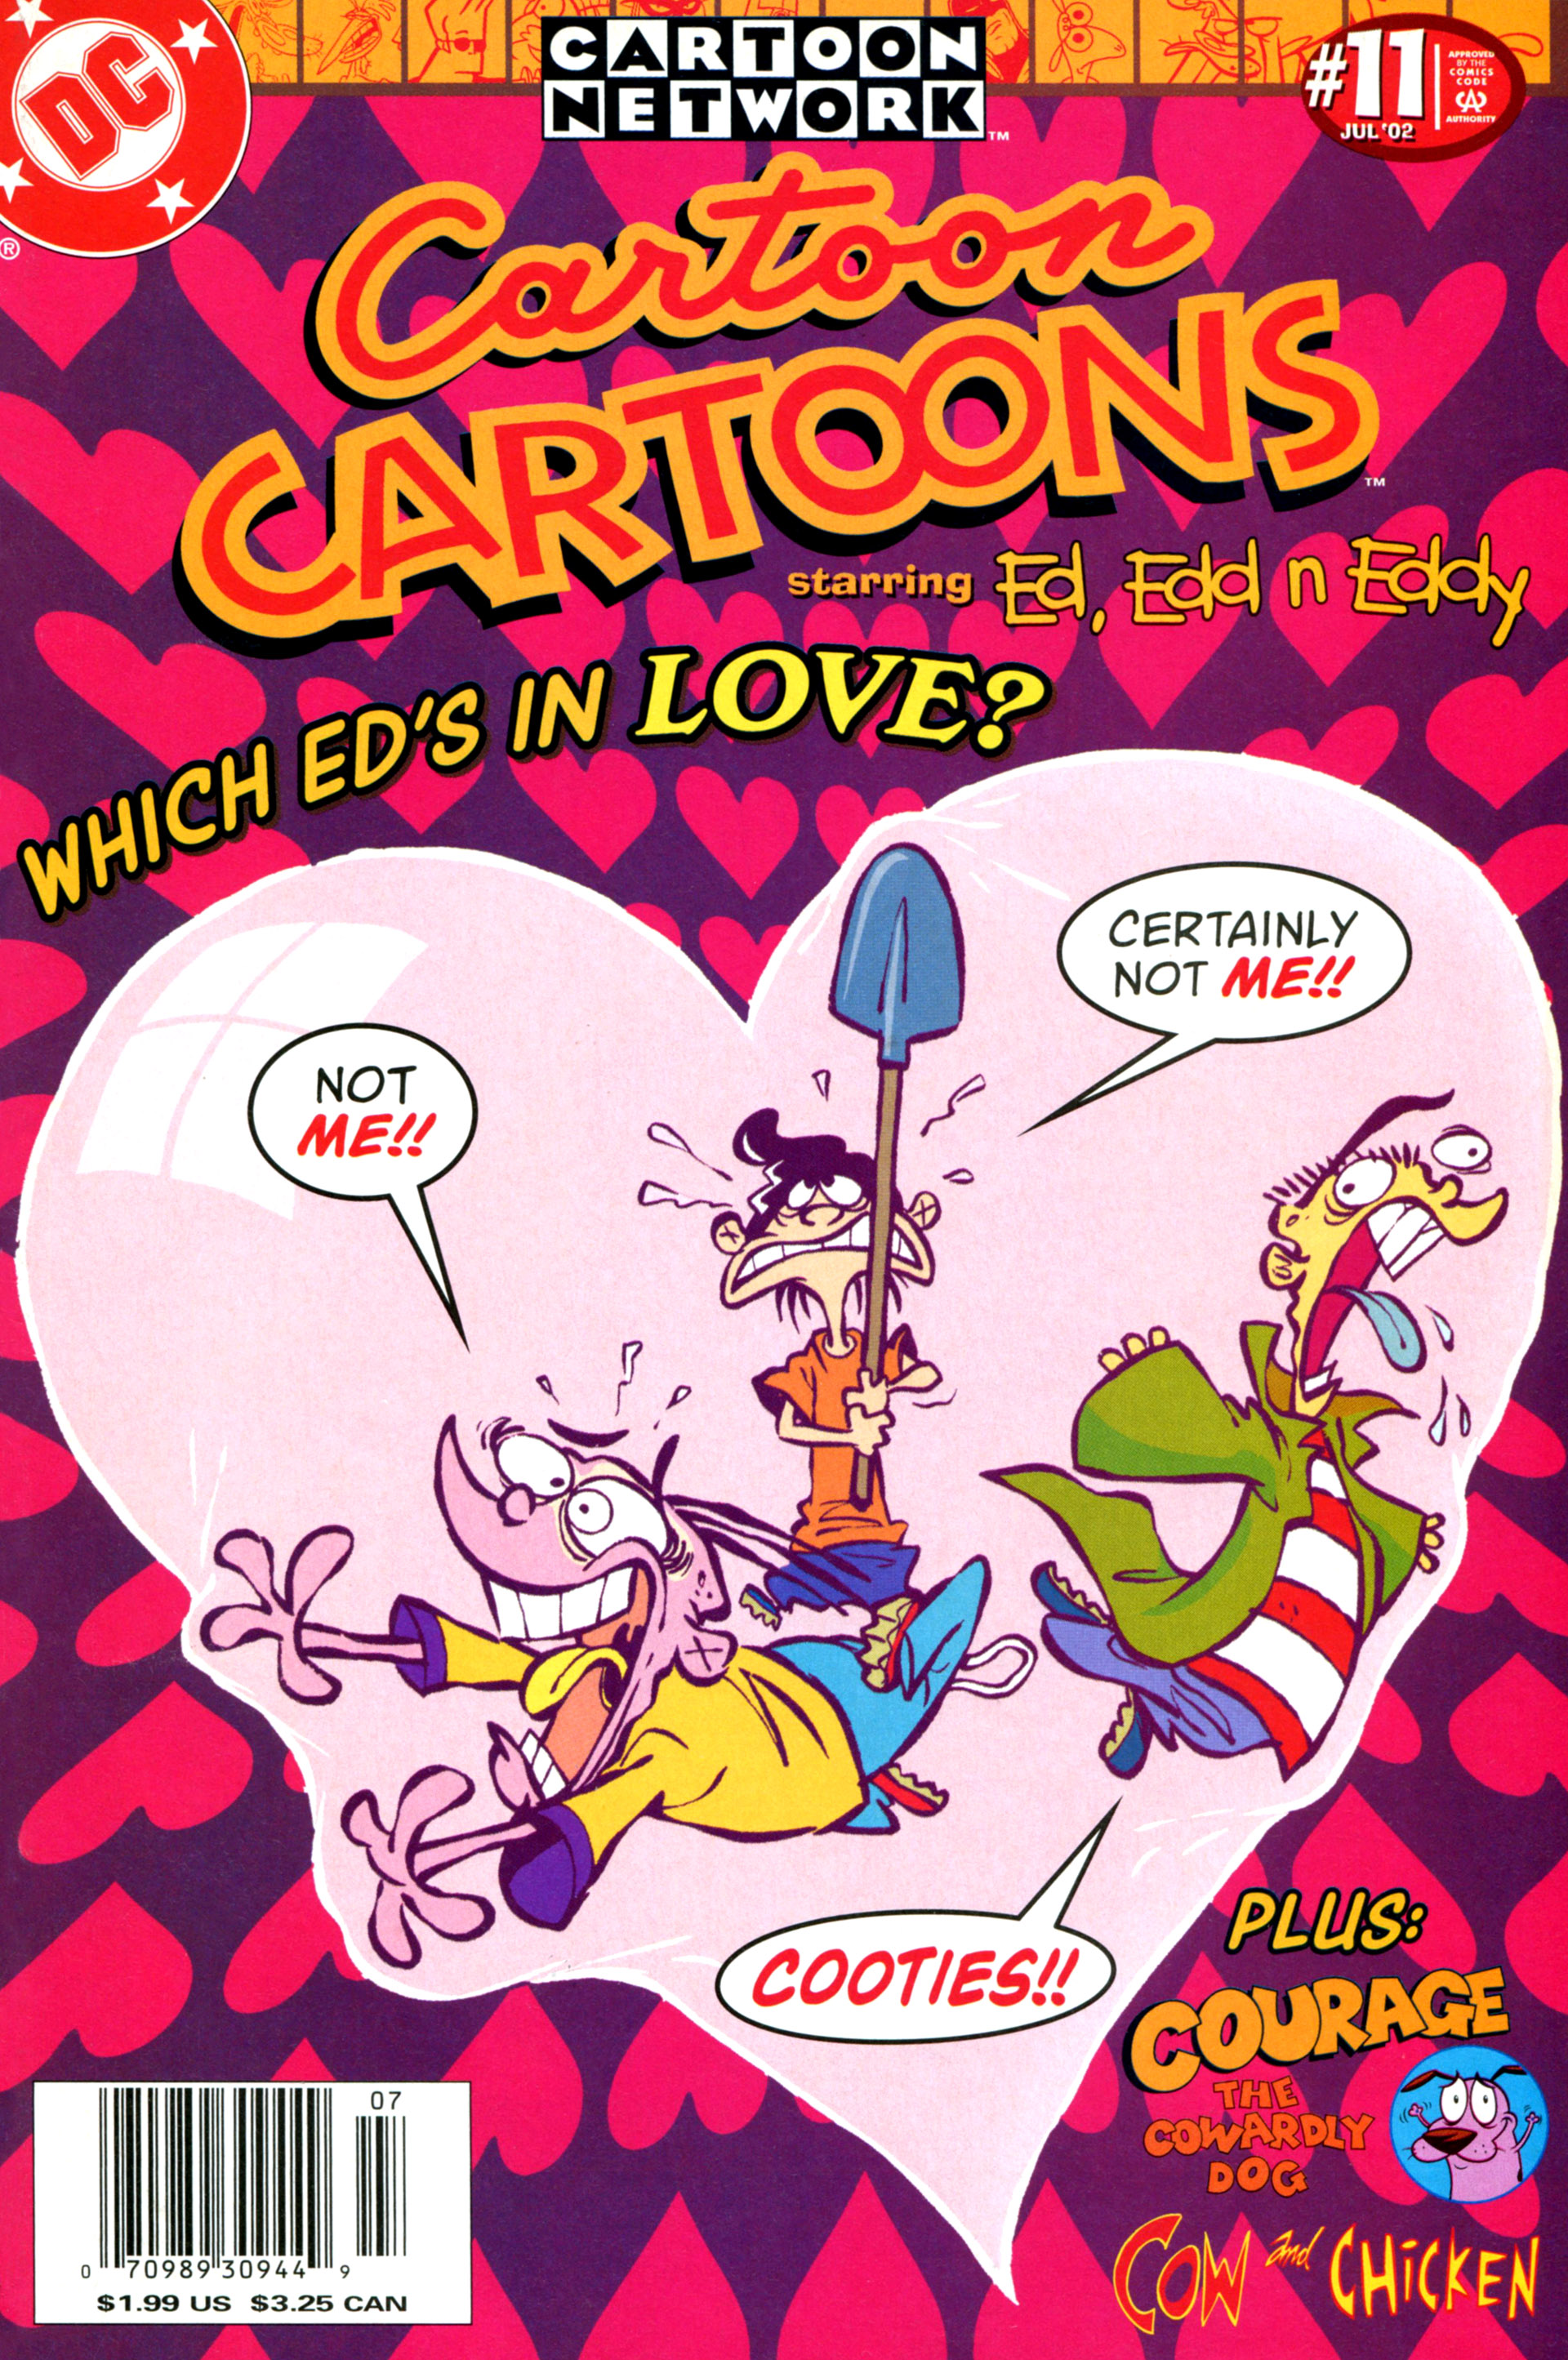 Cartoon Cartoons Issue 11 | Read Cartoon Cartoons Issue 11 comic online in  high quality. Read Full Comic online for free - Read comics online in high  quality .